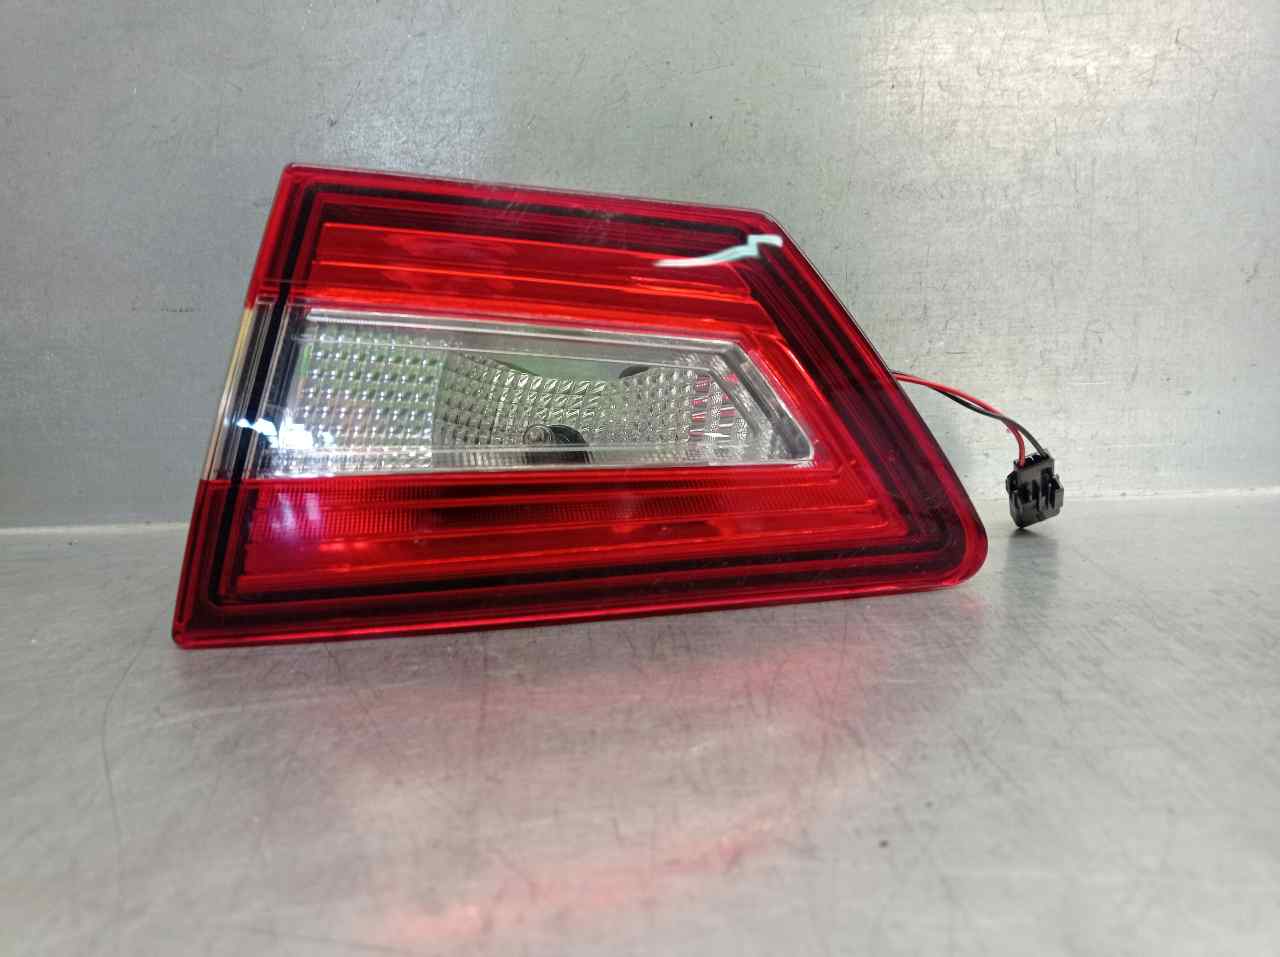 RENAULT Clio 3 generation (2005-2012) Rear Right Taillight Lamp 265505796R 21097714